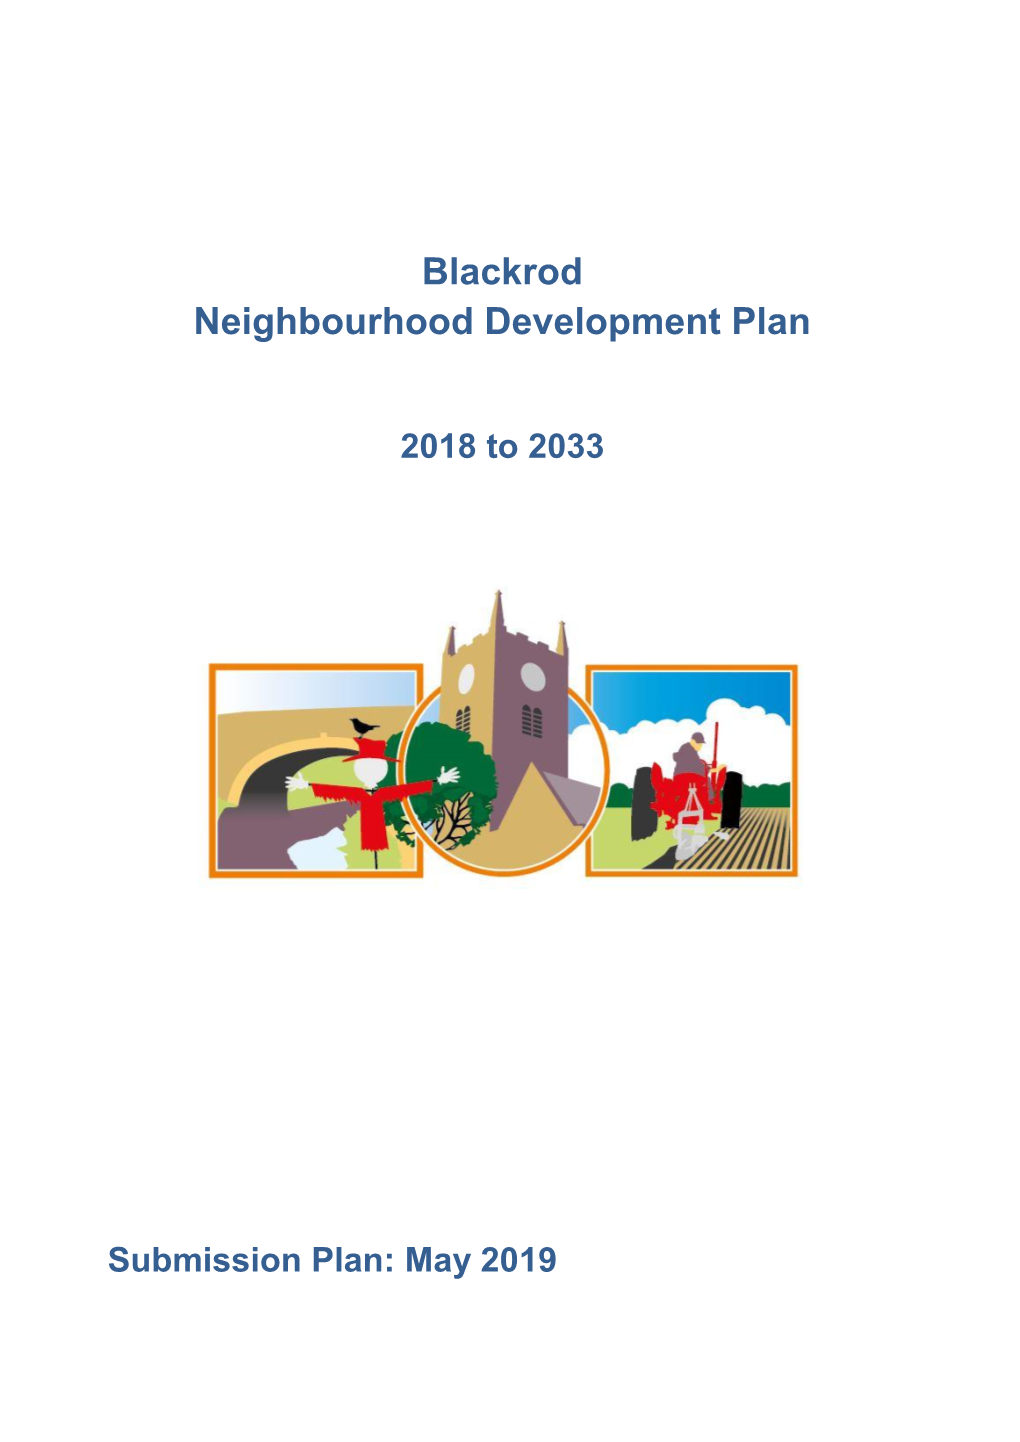 Blackrod Submission Plan May 2019. 190509